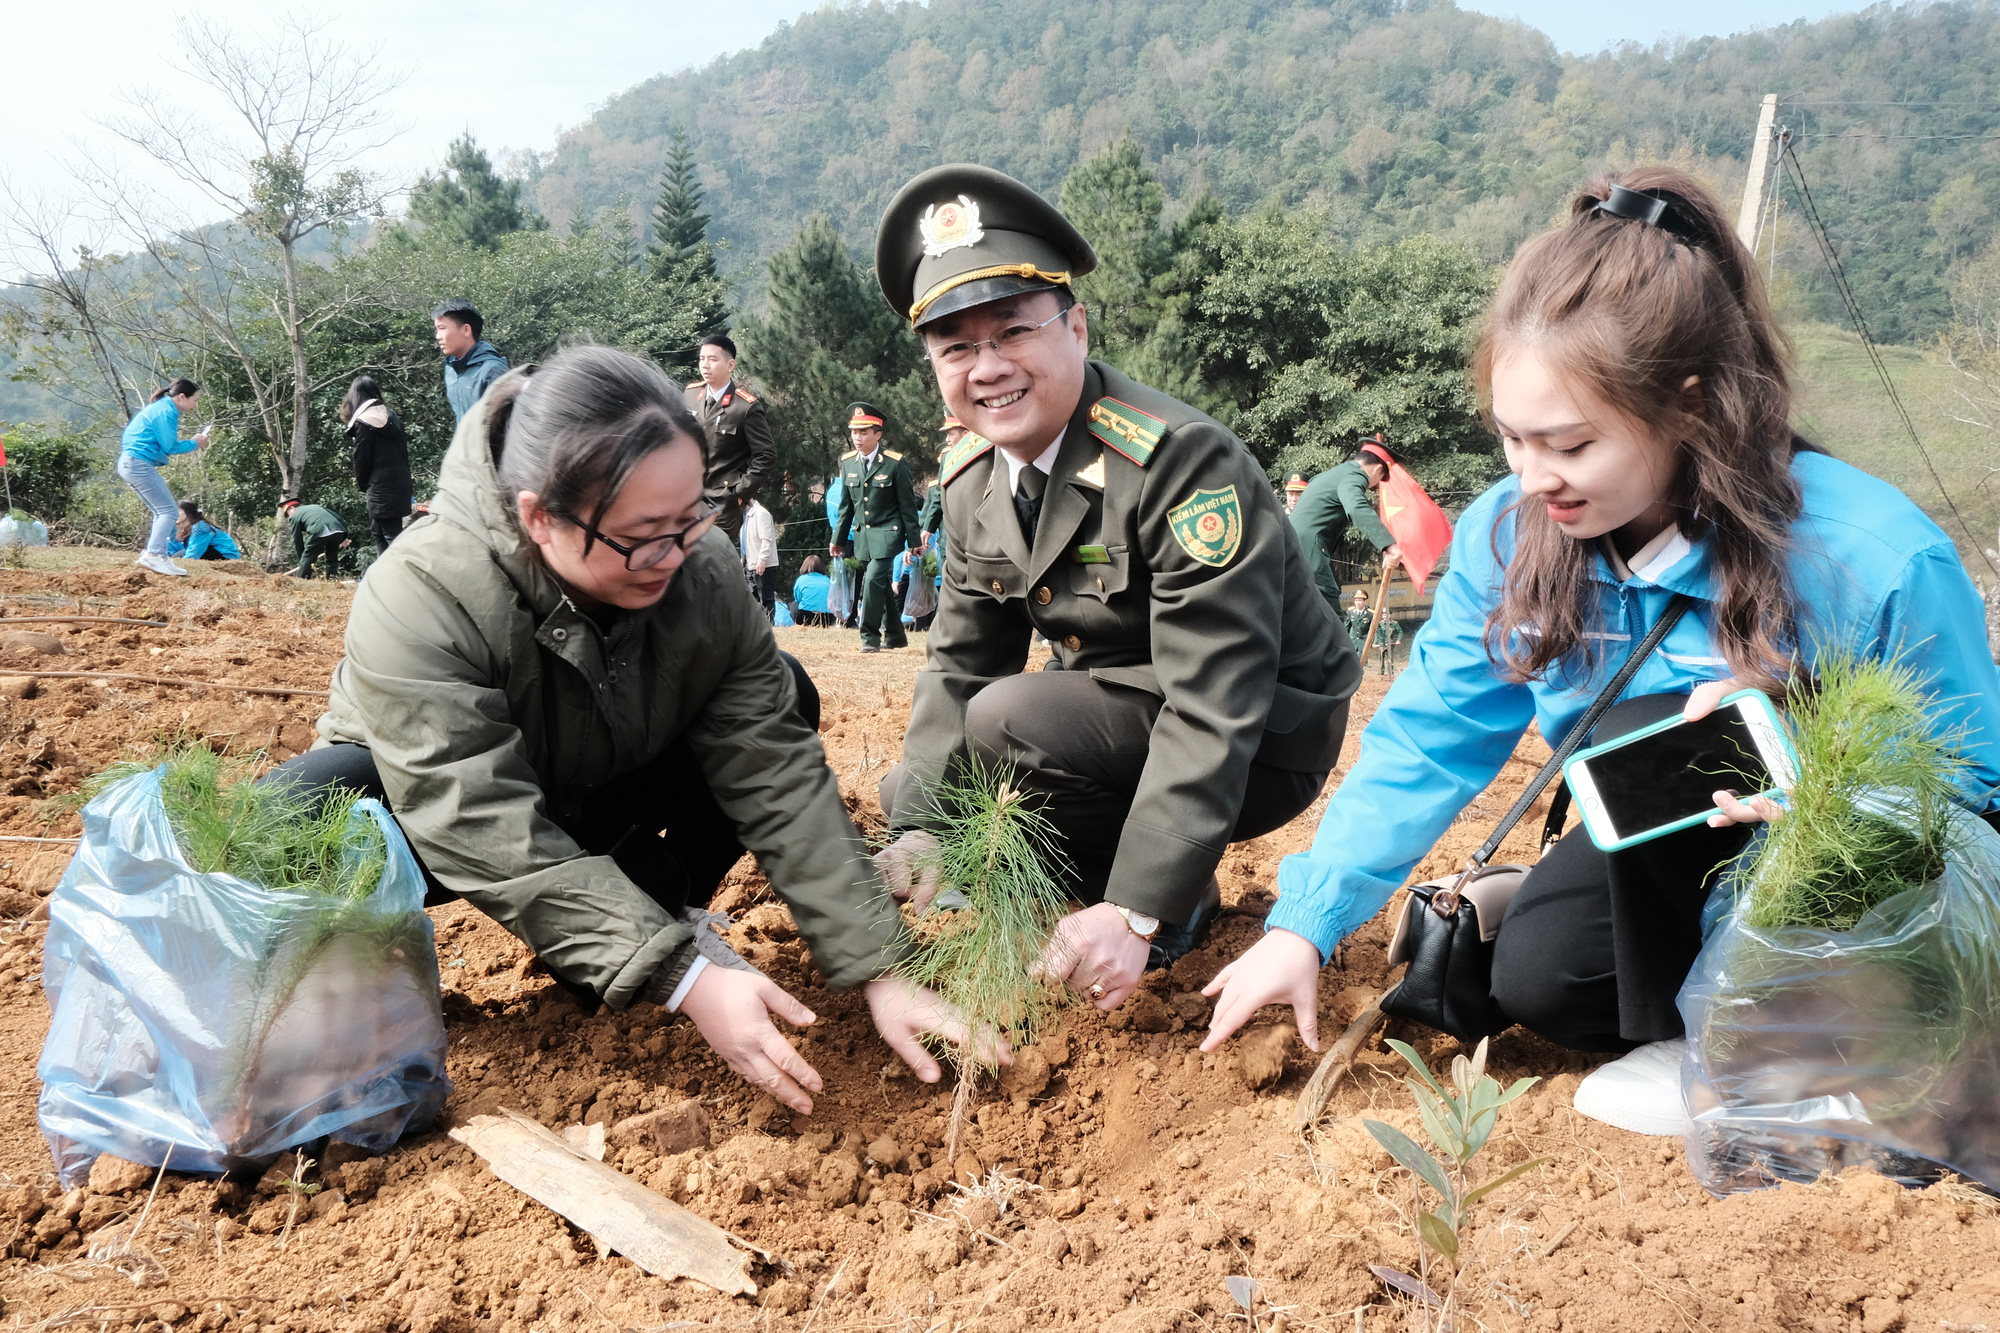 In Hoa Binh Province, young people and members of the Ho Chi Minh Communist Youth Union plant 30,000 trees. Photo: Ha Thanh / Tuoi Tre